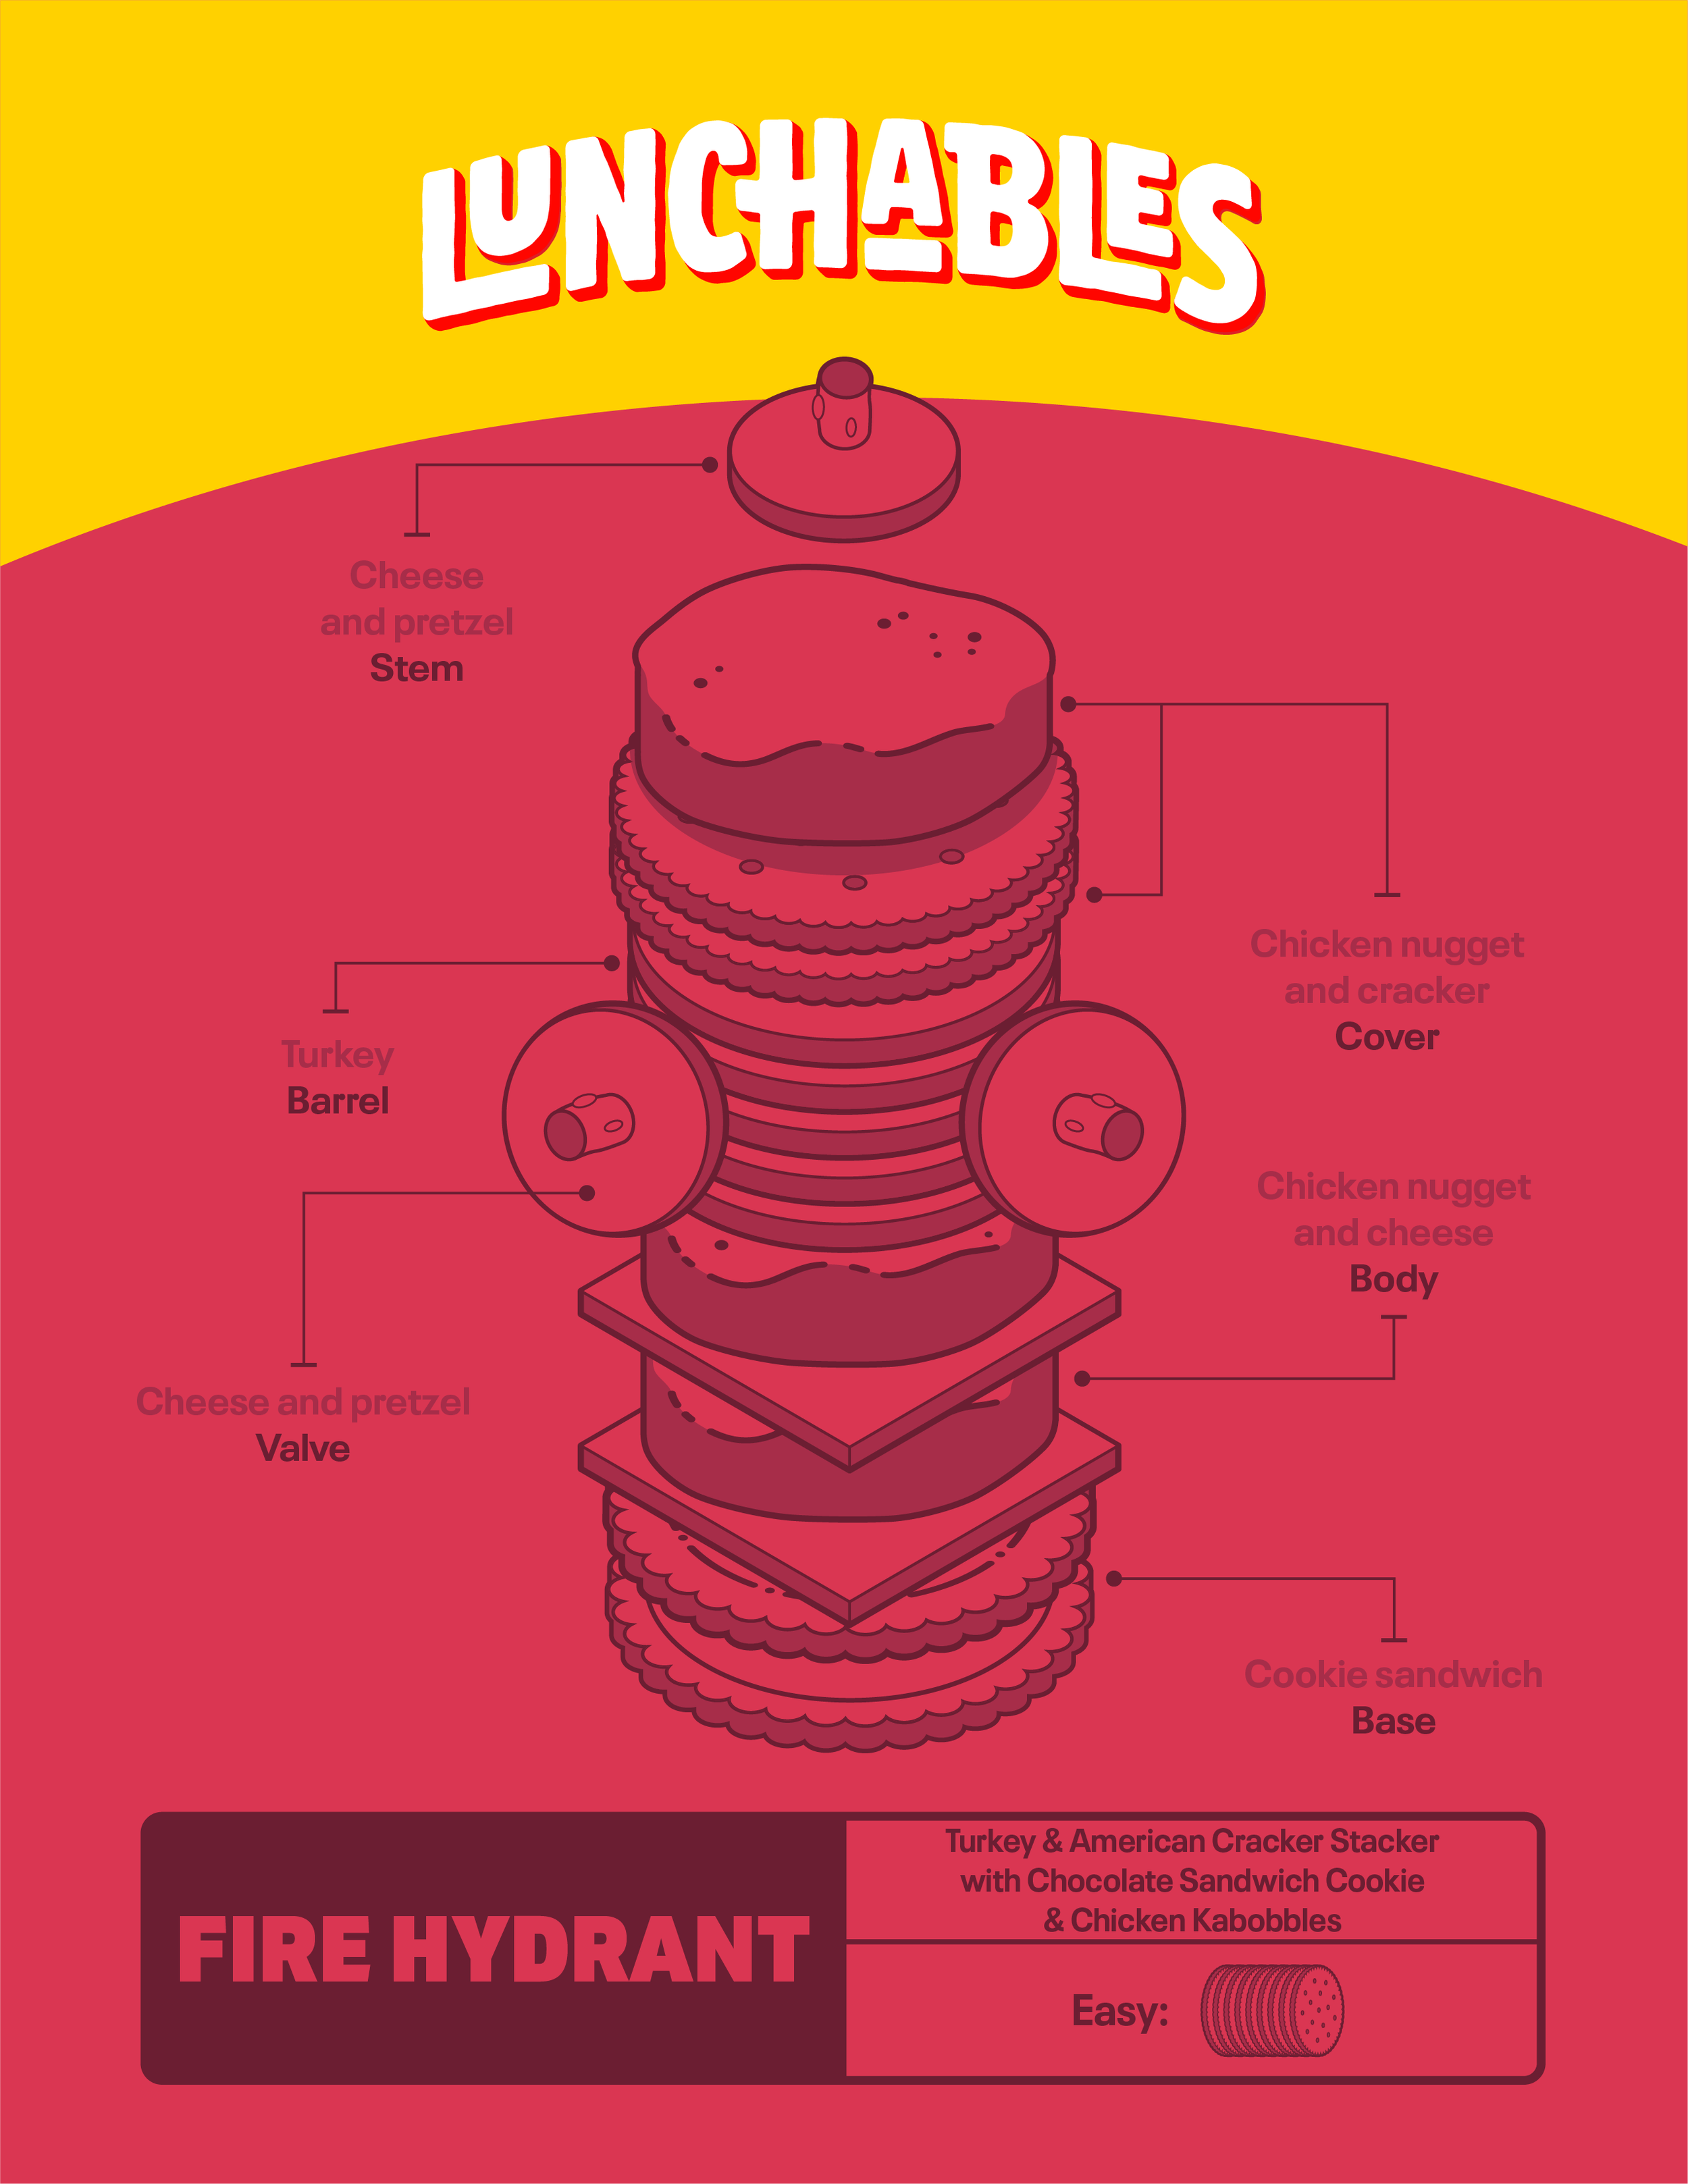 Youprint_Lunchables Fire Hydrant.png